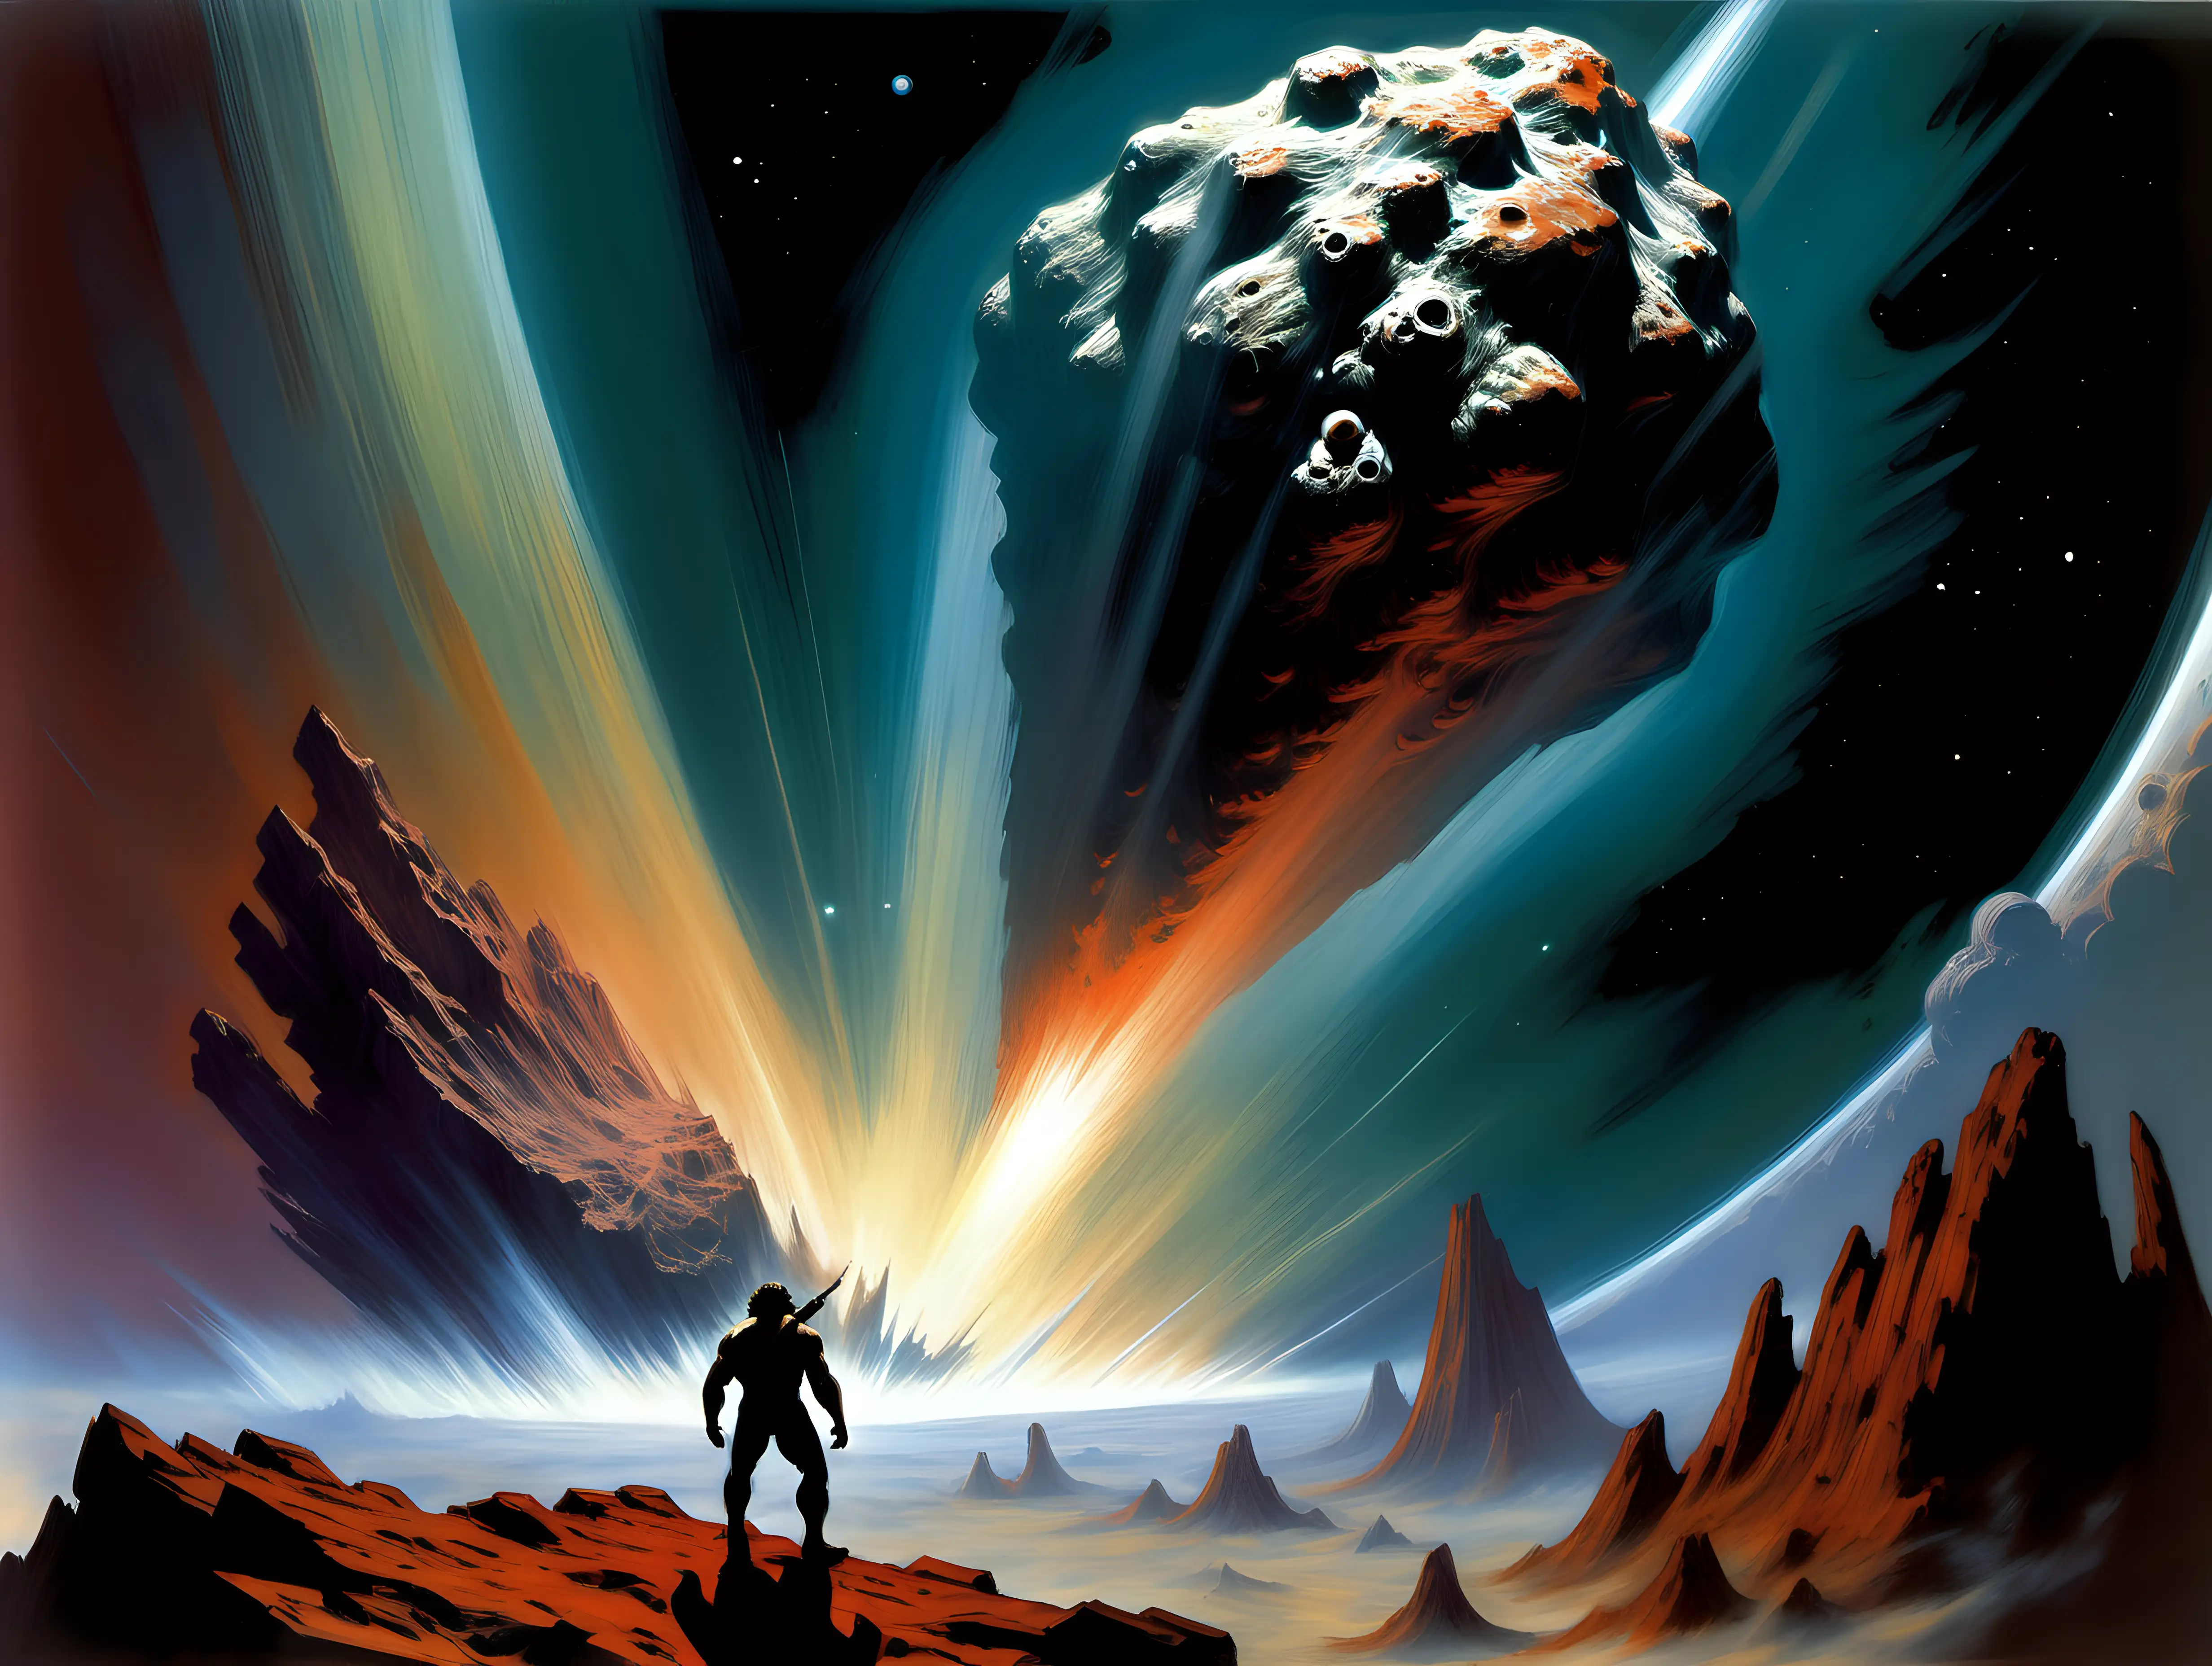 Prehistoric Man Contemplating Approaching Asteroid in Frank Frazetta Style